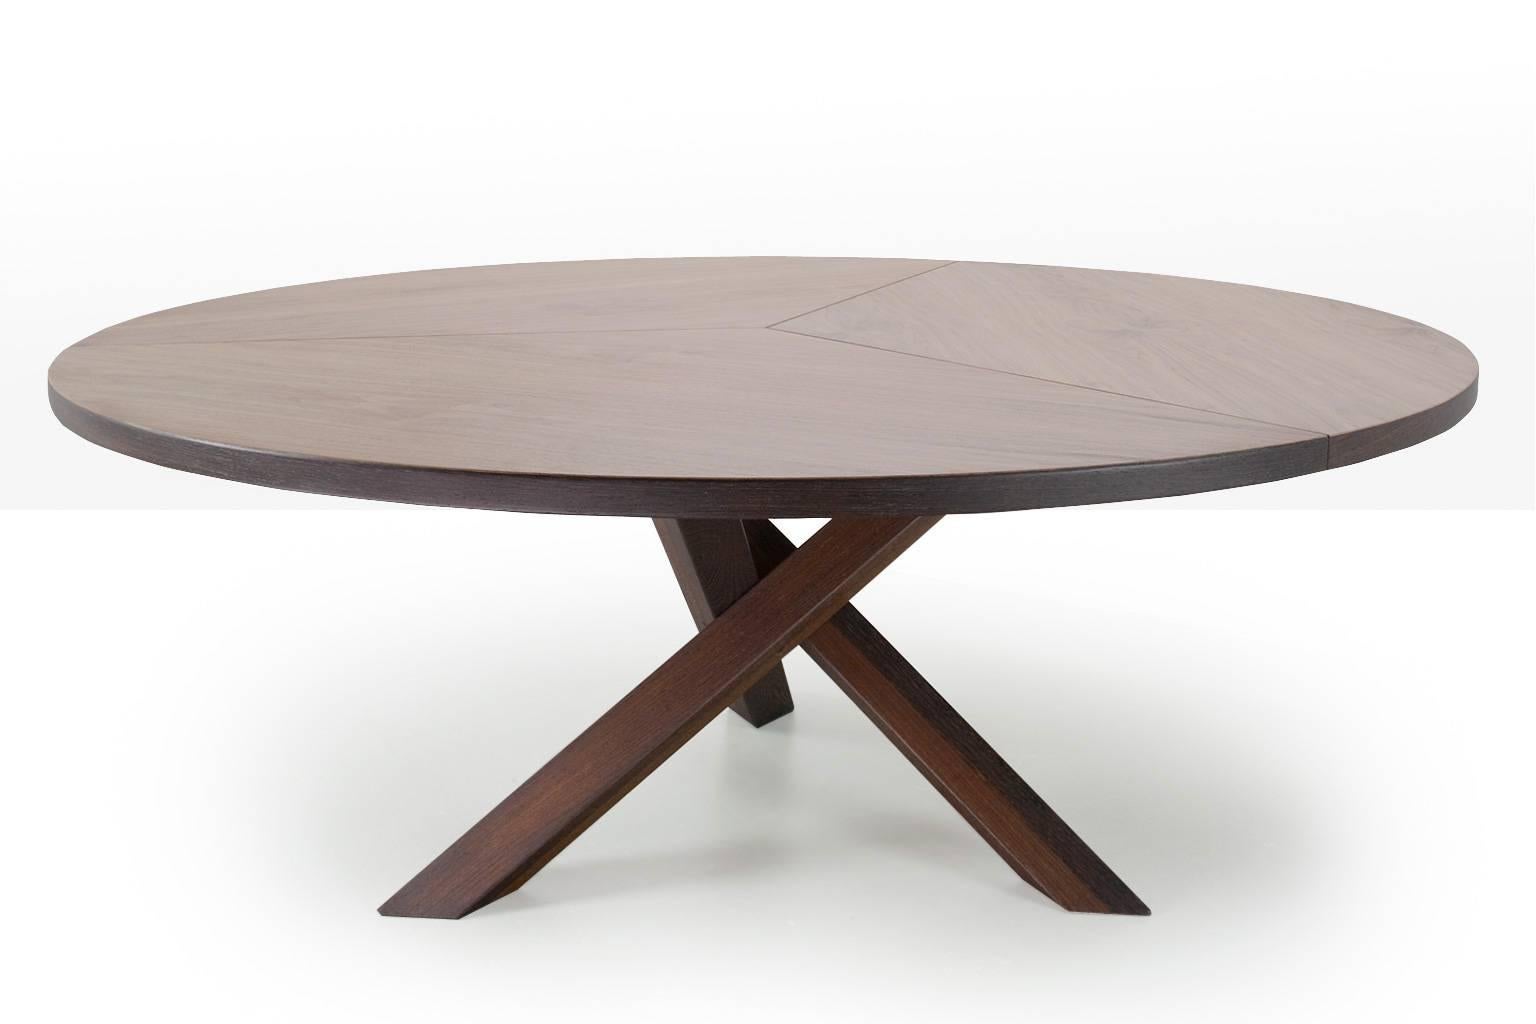 Extra large (180cm / 70.9 inch) round Martin Visser tripod dining room table completely restored, with a completely new layer of excellent walnut veneer, wengé legs and all polished and finished with matt varnish.

The tabletop is divided in three